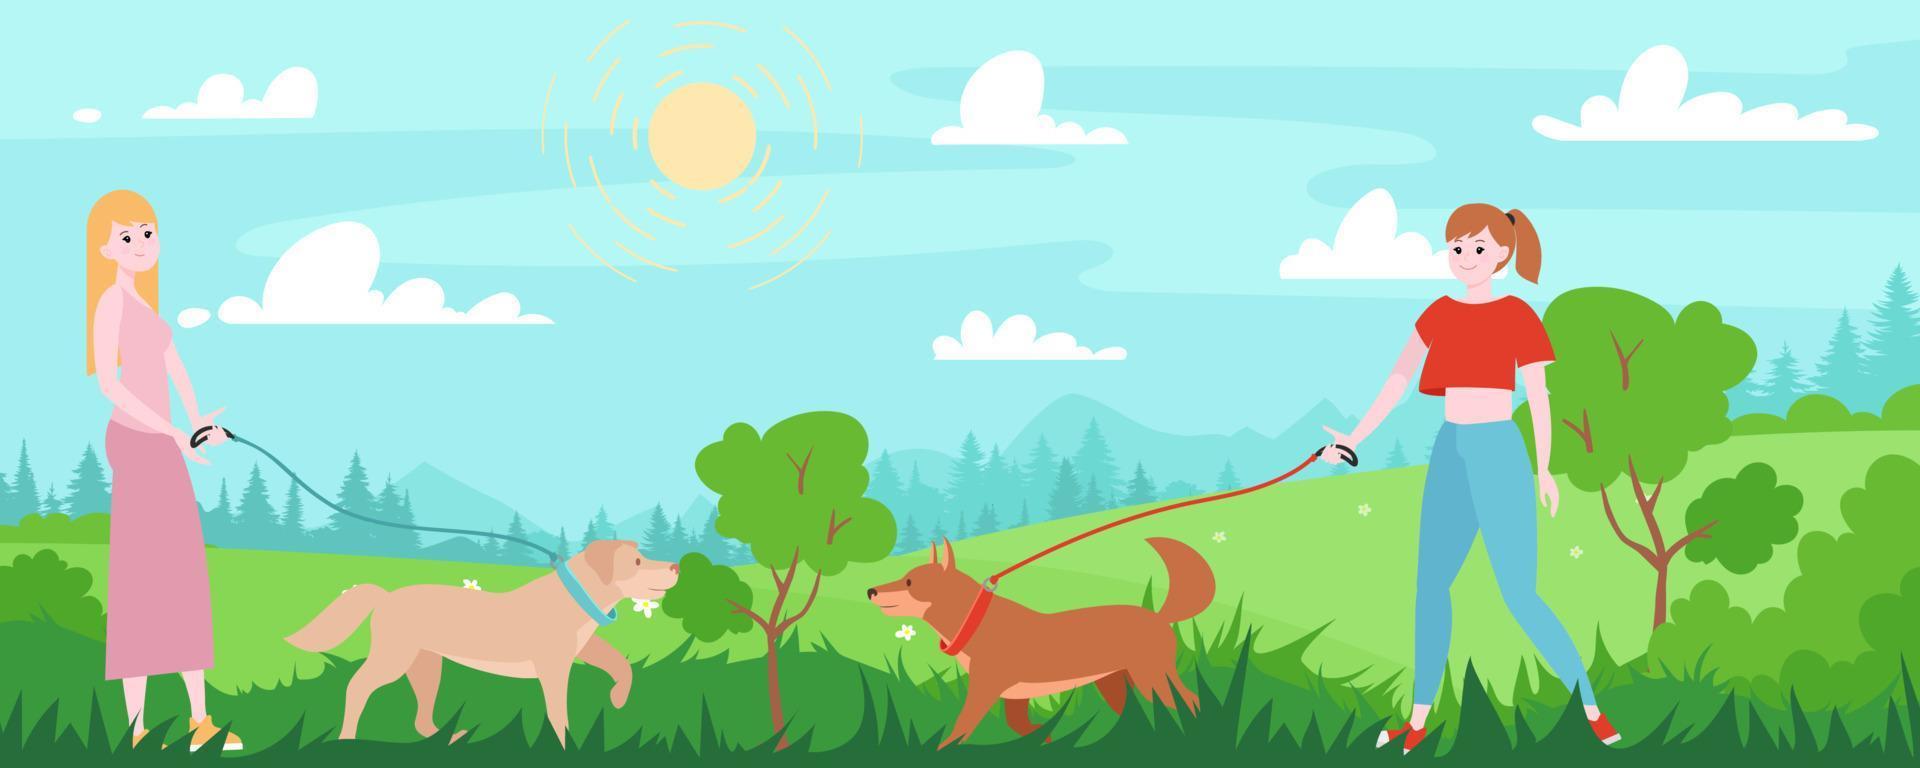 Young women's walking with dogs in the park, spring season. Outdoor activity, training concept.  Landscape with green grass meadow, trees, flowers, bugs, and forest silhouette on the background. vector